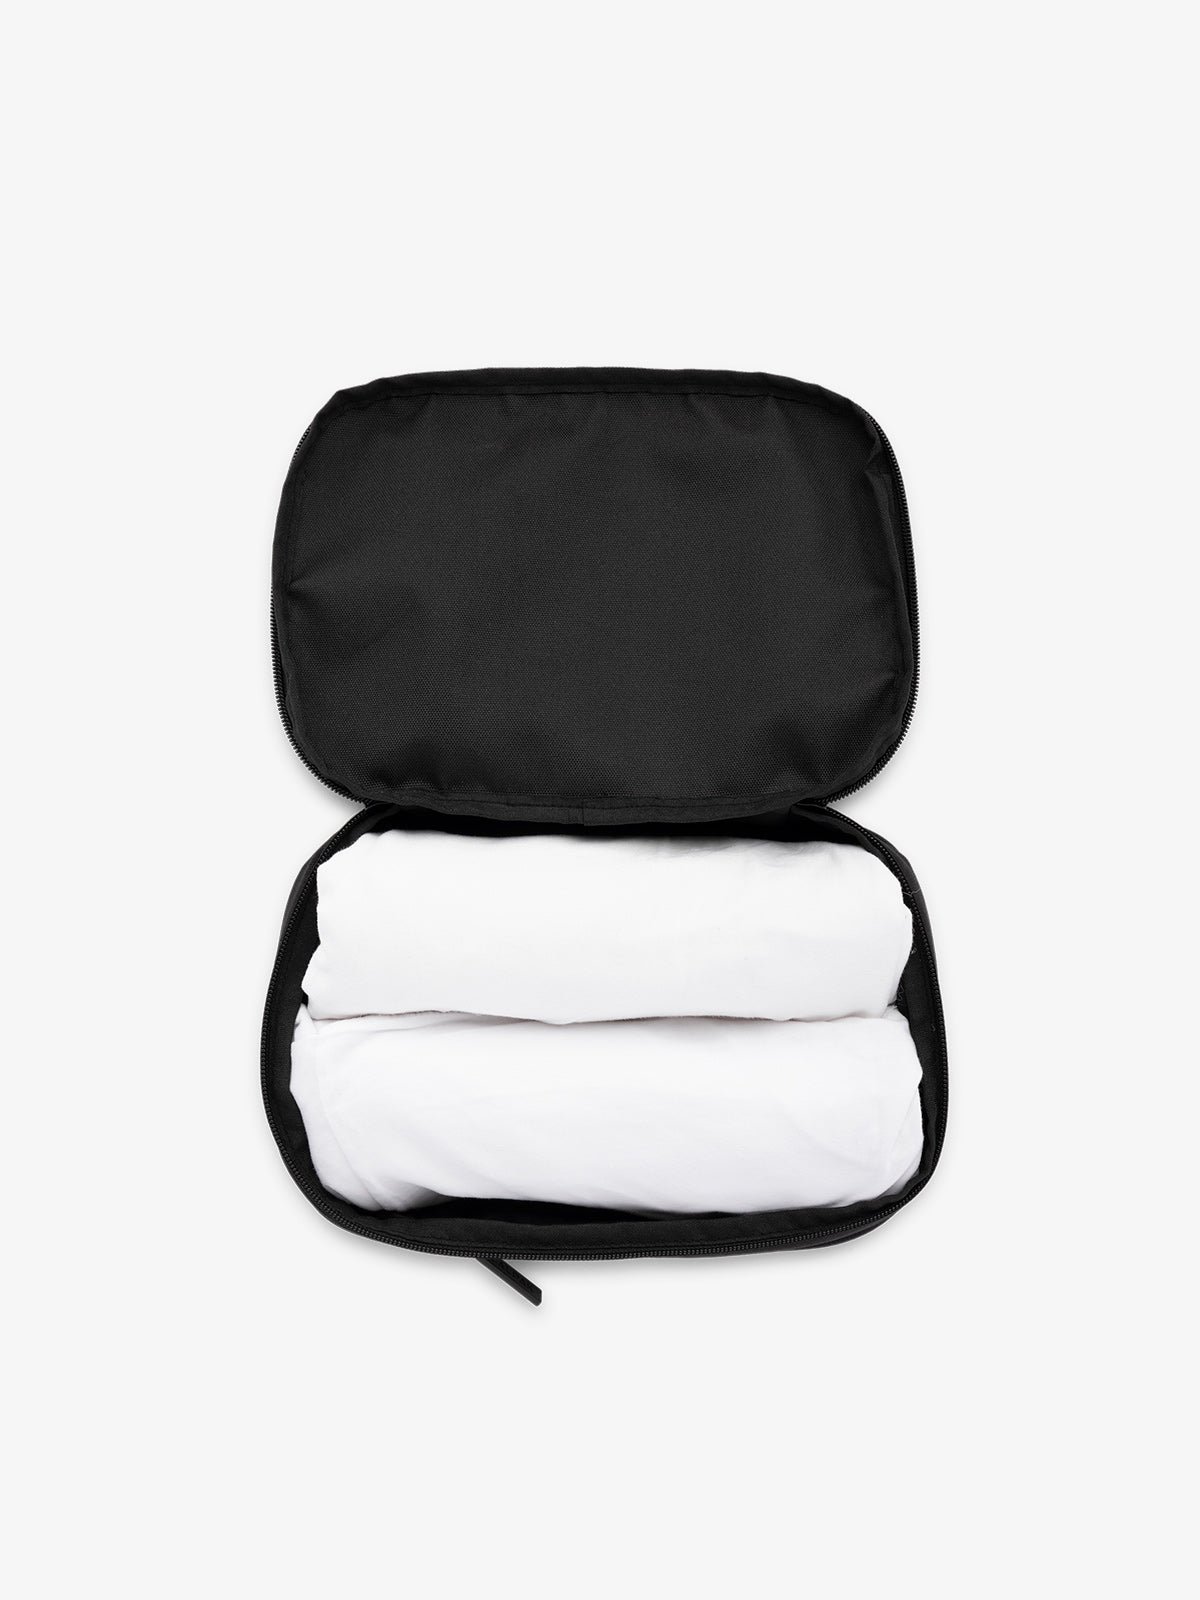 CALPAK small packing cubes for travel made with durable material in black